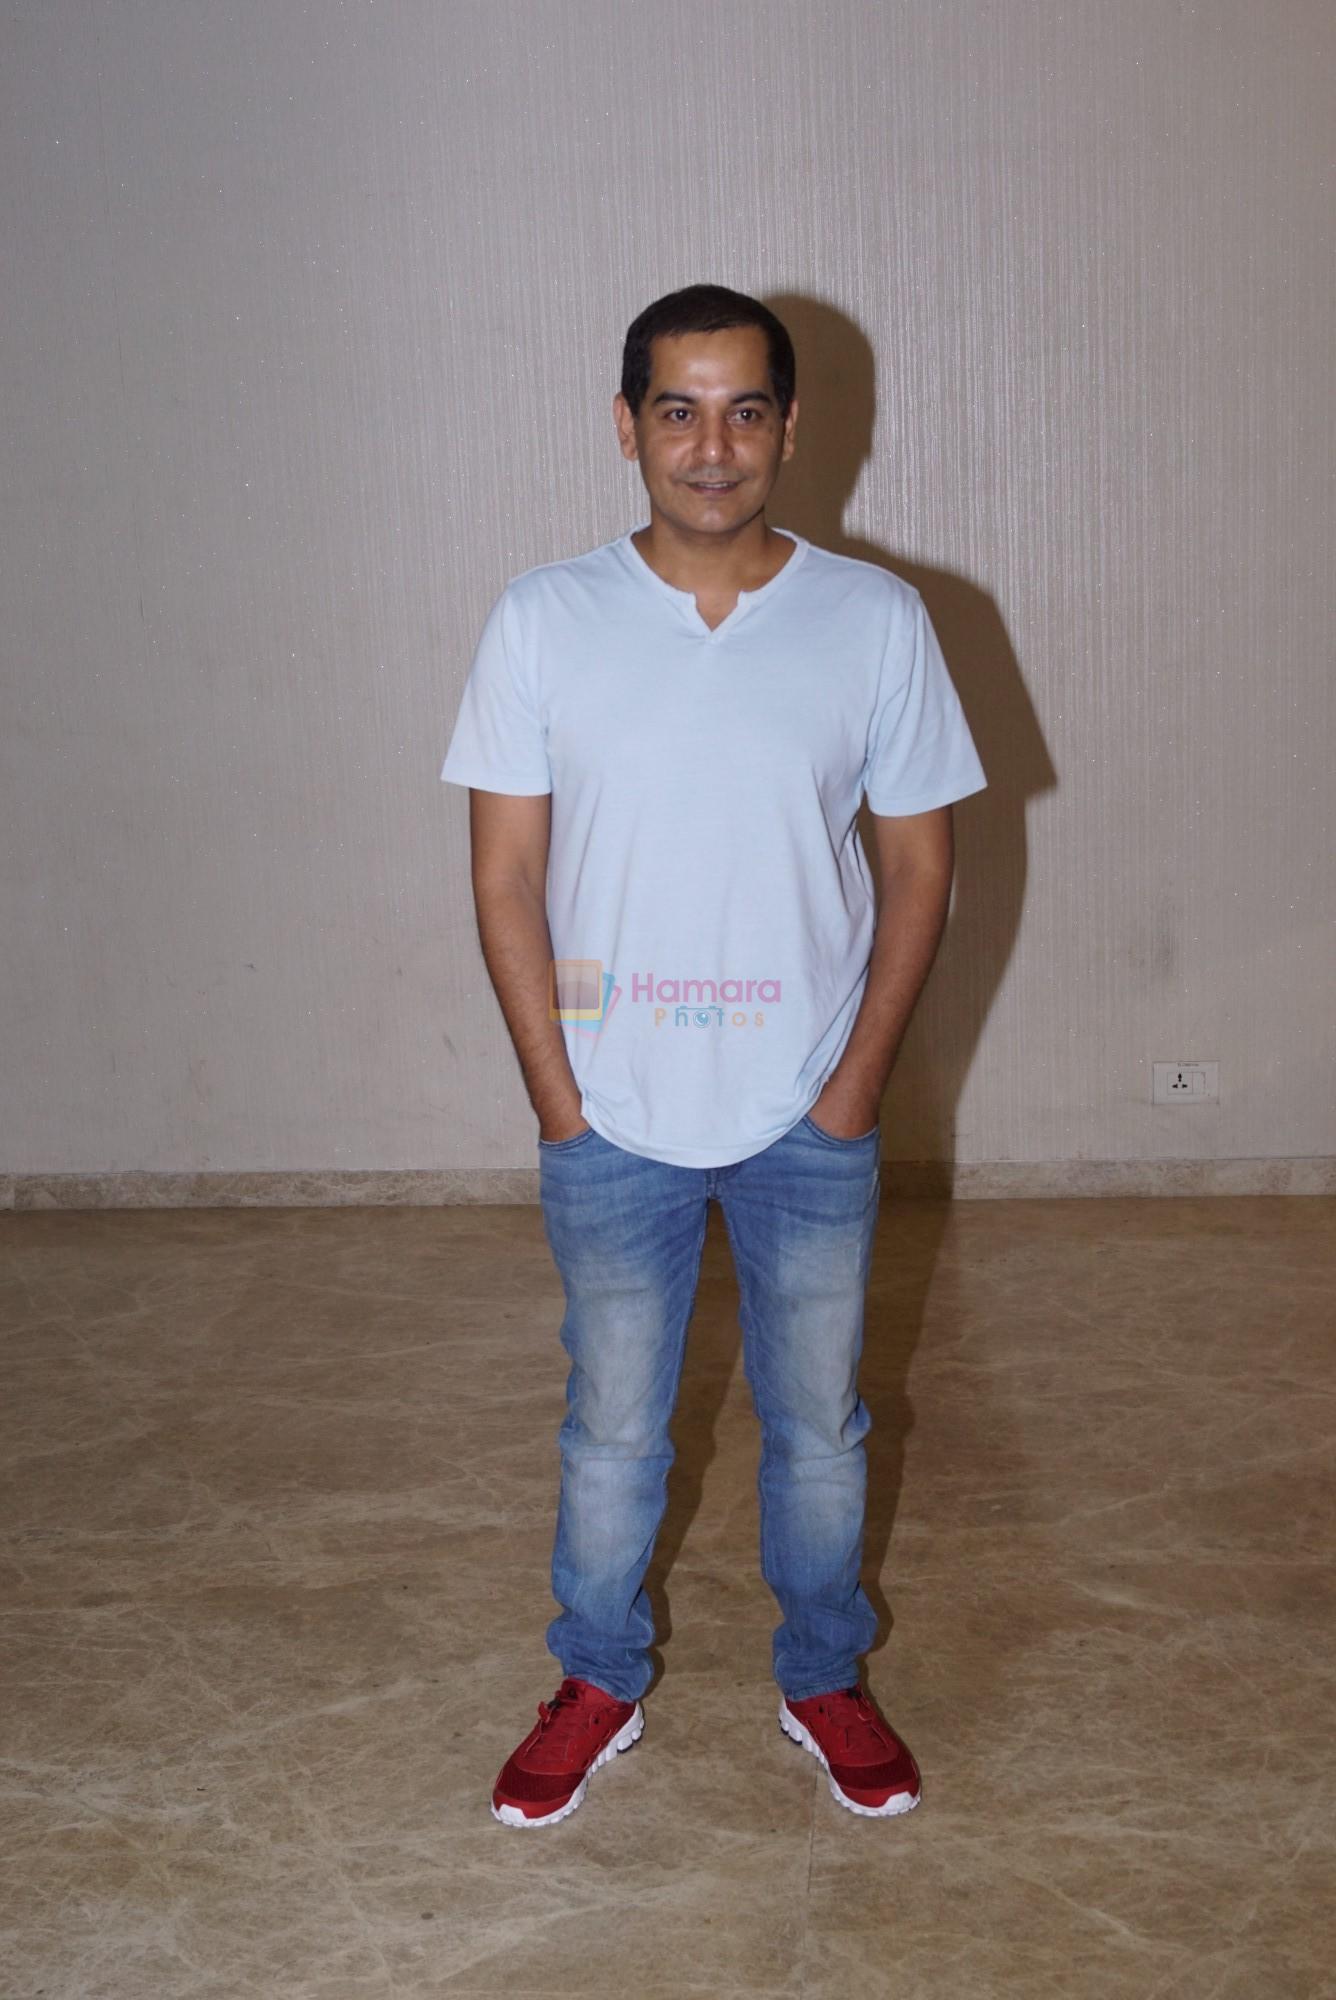 Gaurav Gera at the Special Screening Of Film Veere Di Wedding on 29th May 2018